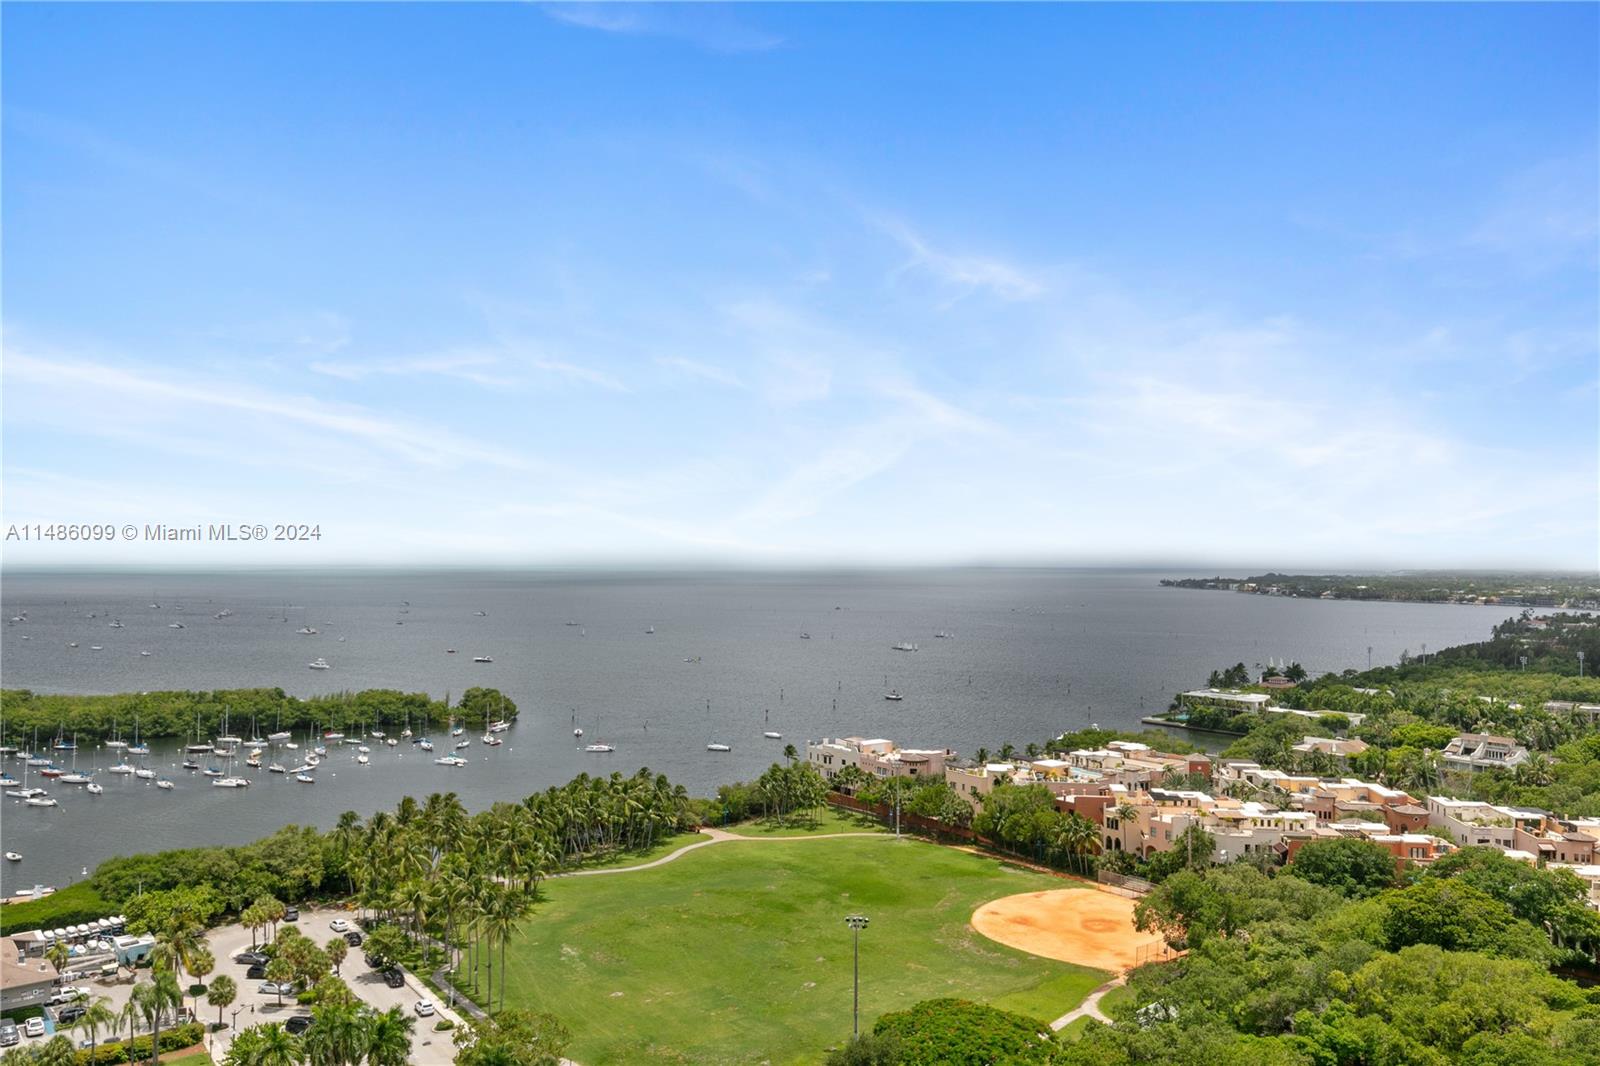 BACK ON THE MARKET REPRICED Magazine worthy renovation in this Coconut Grove dream condo. Views of the glistening Blue waters of Biscayne Bay and sunsets that are mesmerizing. Located in full service resort style hotel condo. No Rental restrictions affords the owner many options for rentals or private residence.Upgraded high impact floor to ceiling doors, electric shades including black outs,new kitchen with marble counters Bath with Huge spa like  shower ,wood floors,custom italian interior doors,primary walk in closet professionally racked out for maximum storage, office nook,nest thermostats, creative Stroage throughout. Possible to convert to a 2 key unit.